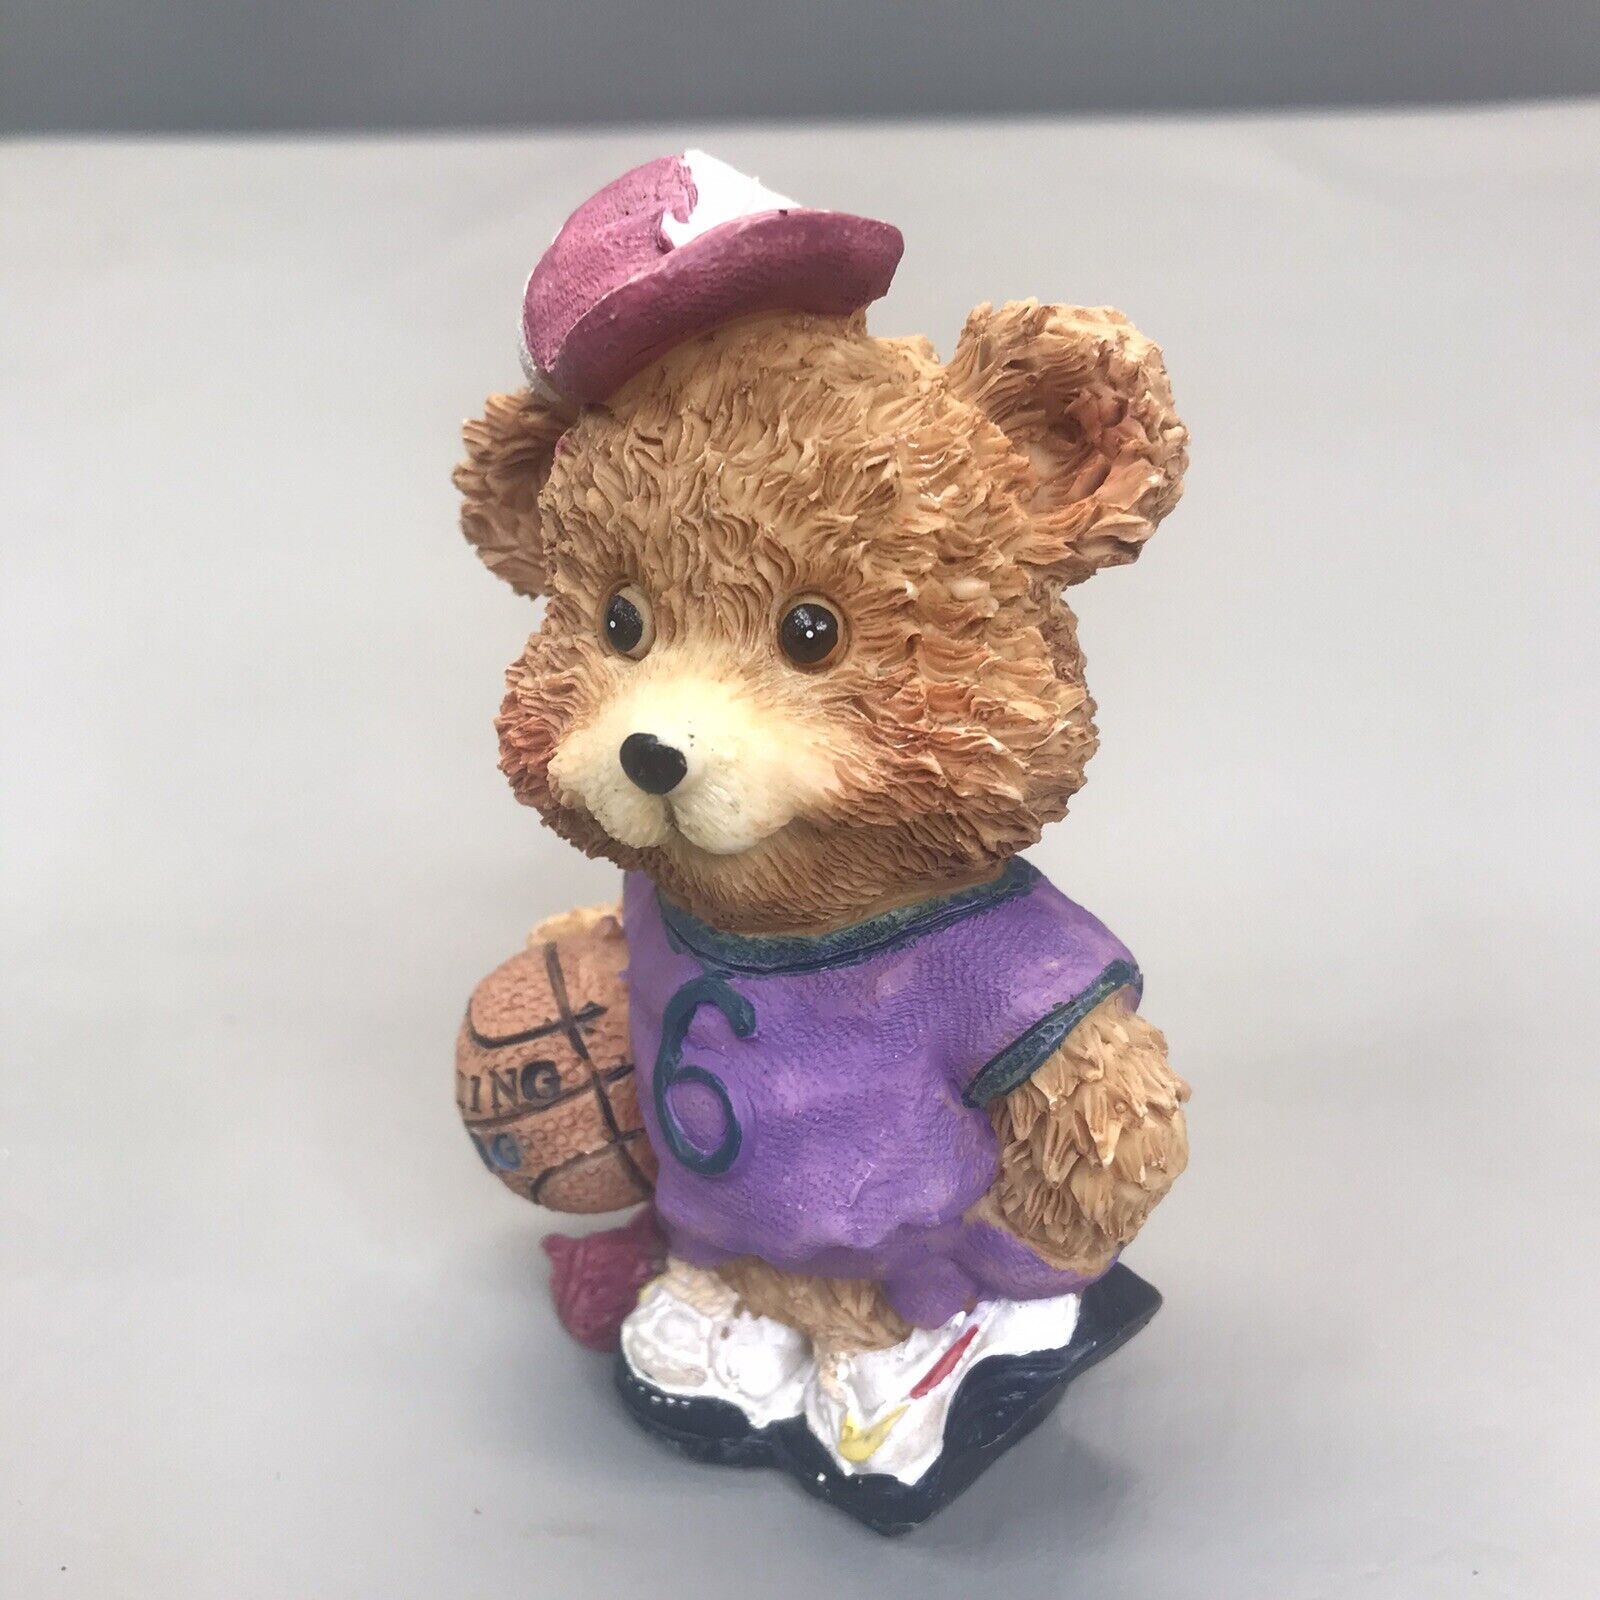 Resin Teddy Bear Figurine # 6 With Spalding Basketball And Nike Hat  4\